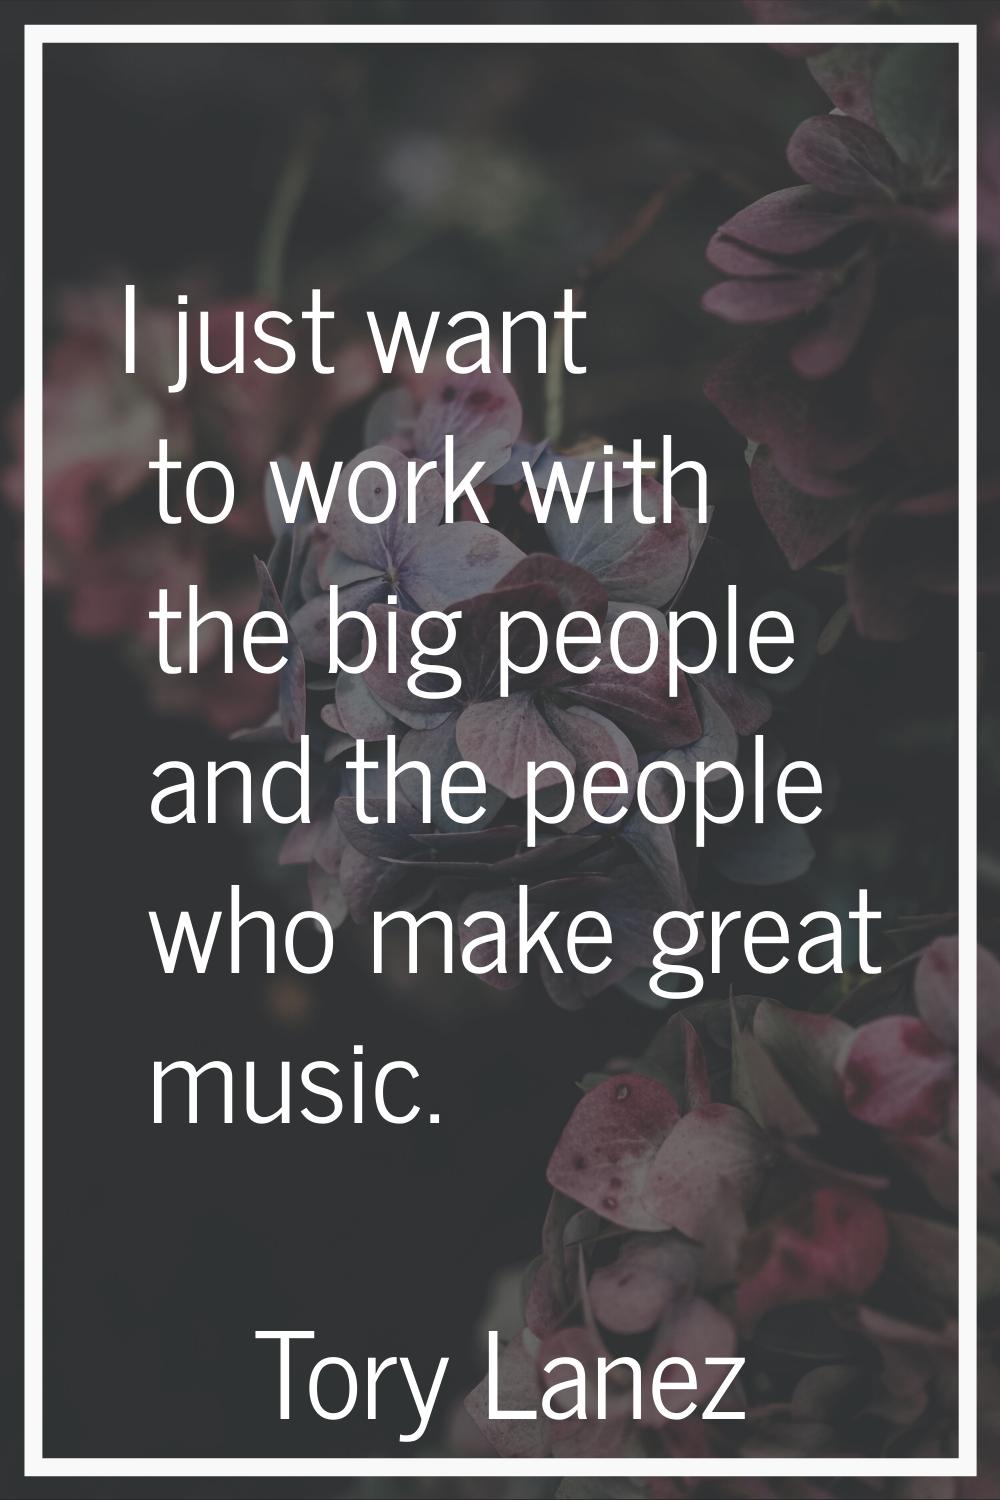 I just want to work with the big people and the people who make great music.